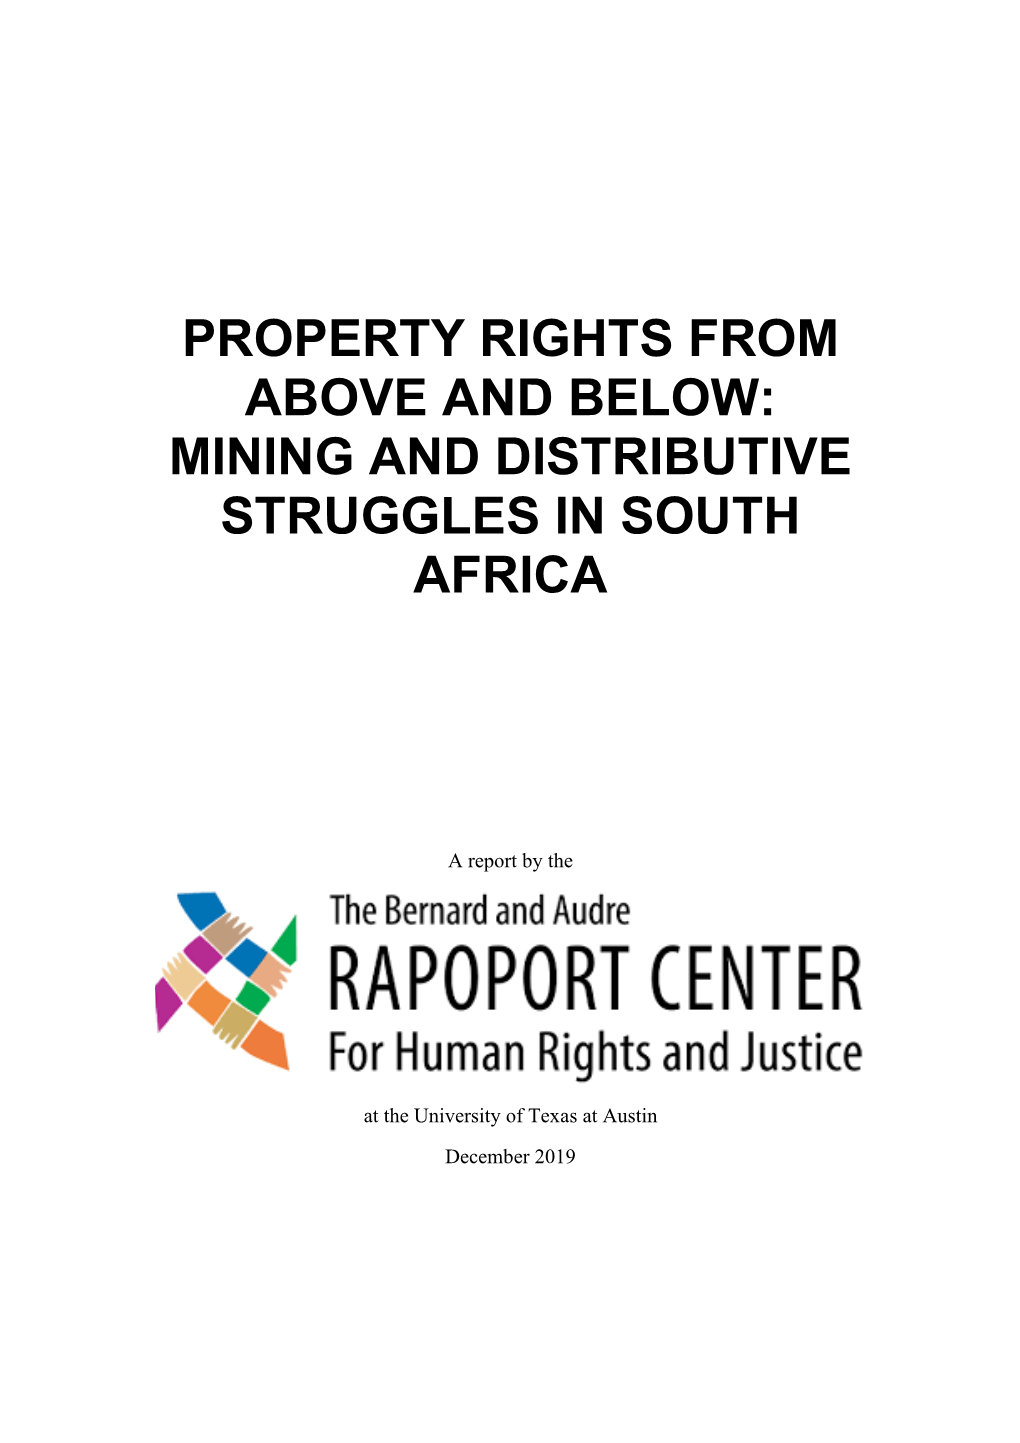 Mining and Distributive Struggles in South Africa